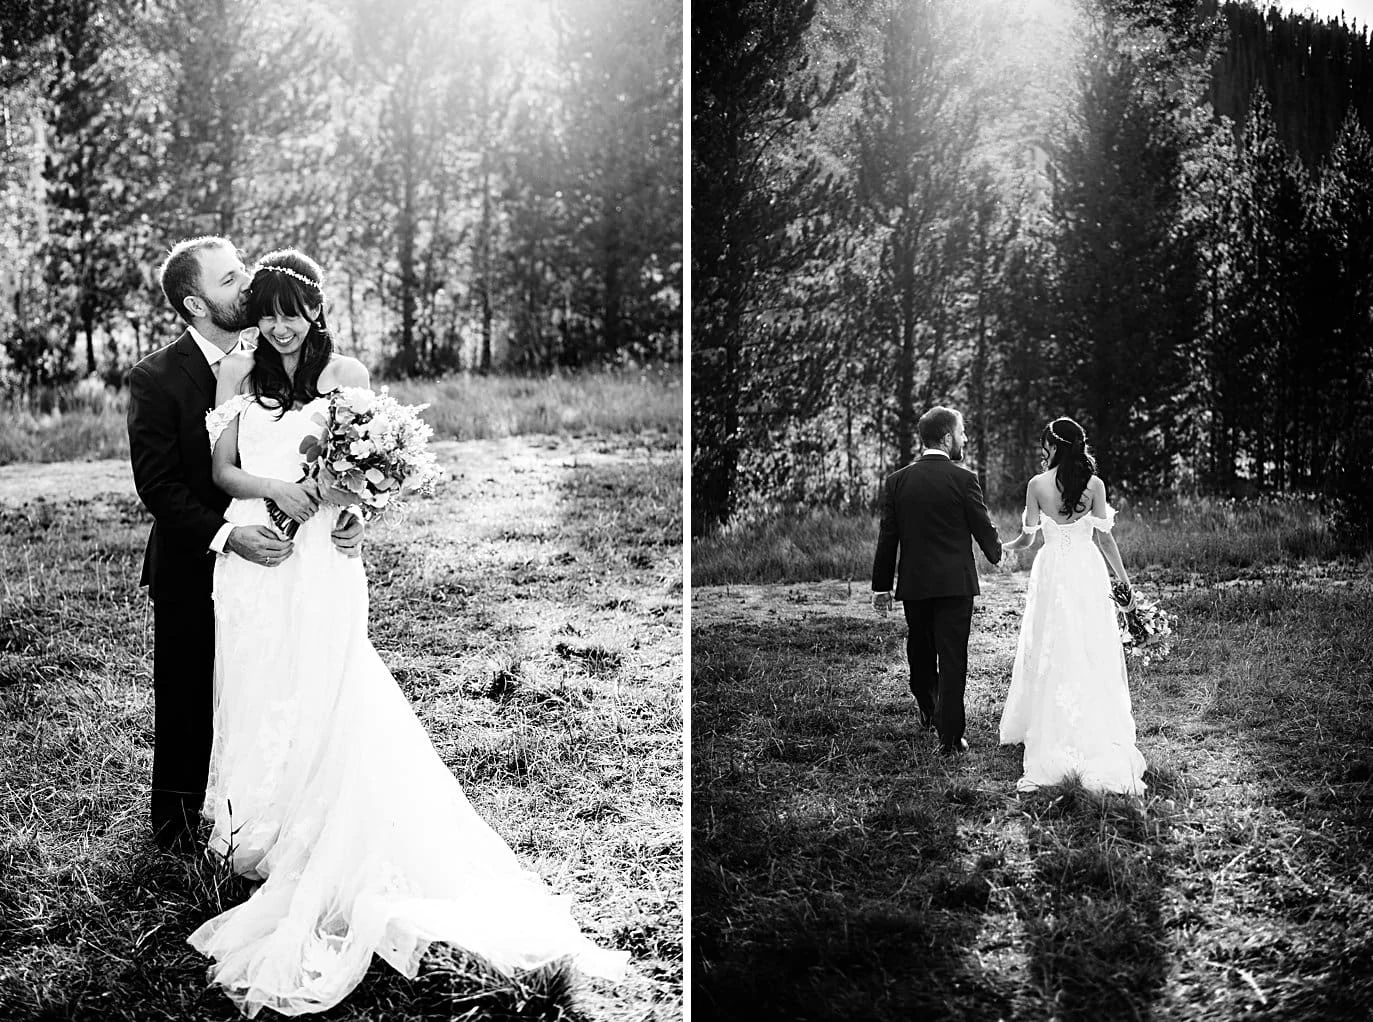 romantic black and white portraits of bride and groom at intimate Grand Lake wedding by Estes Park wedding photographer Jennie Crate